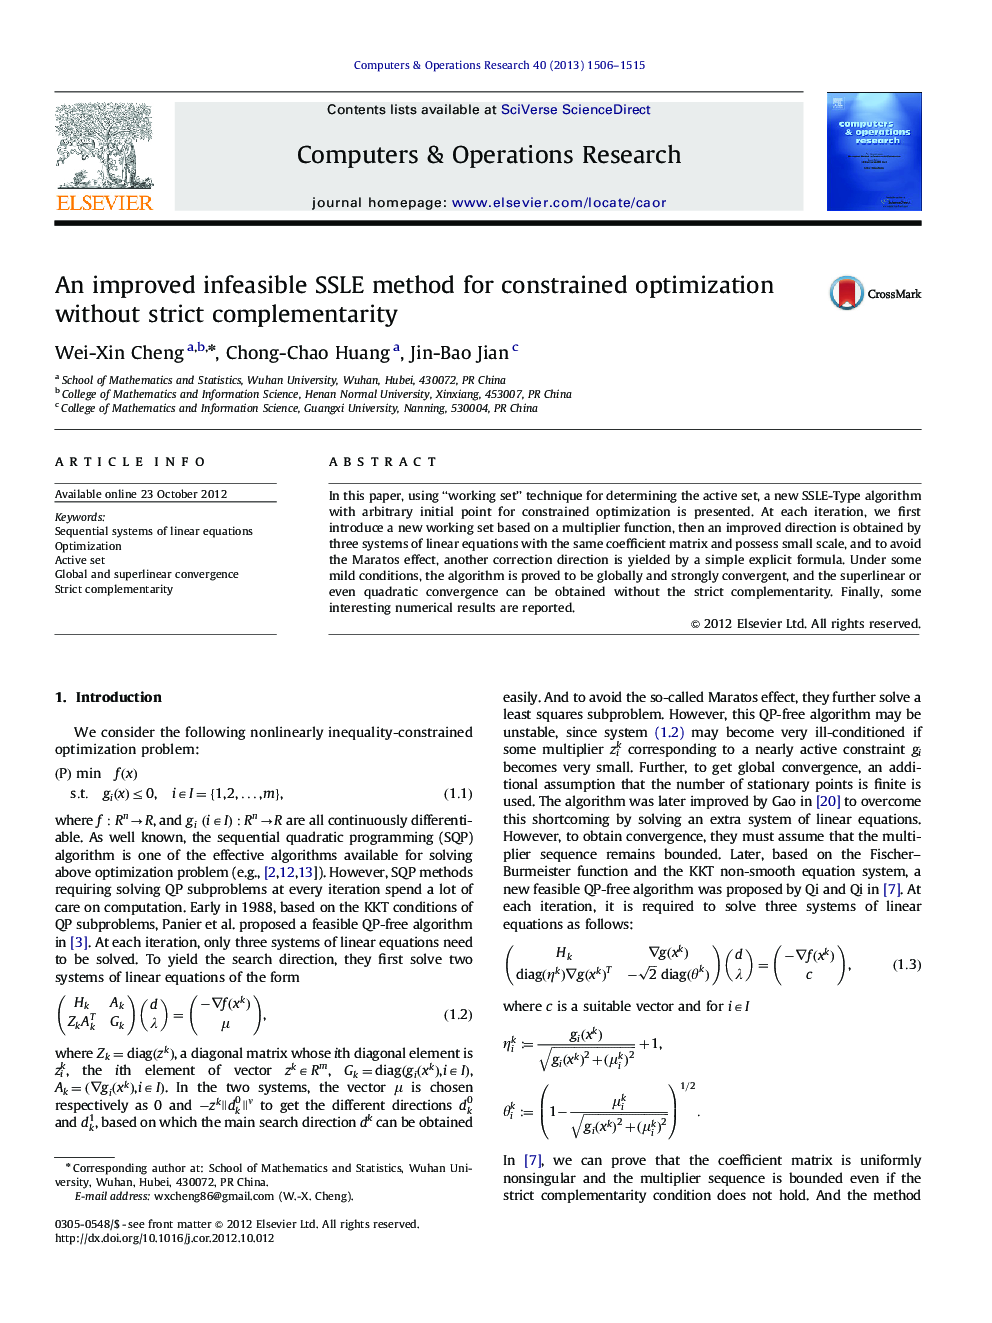 An improved infeasible SSLE method for constrained optimization without strict complementarity